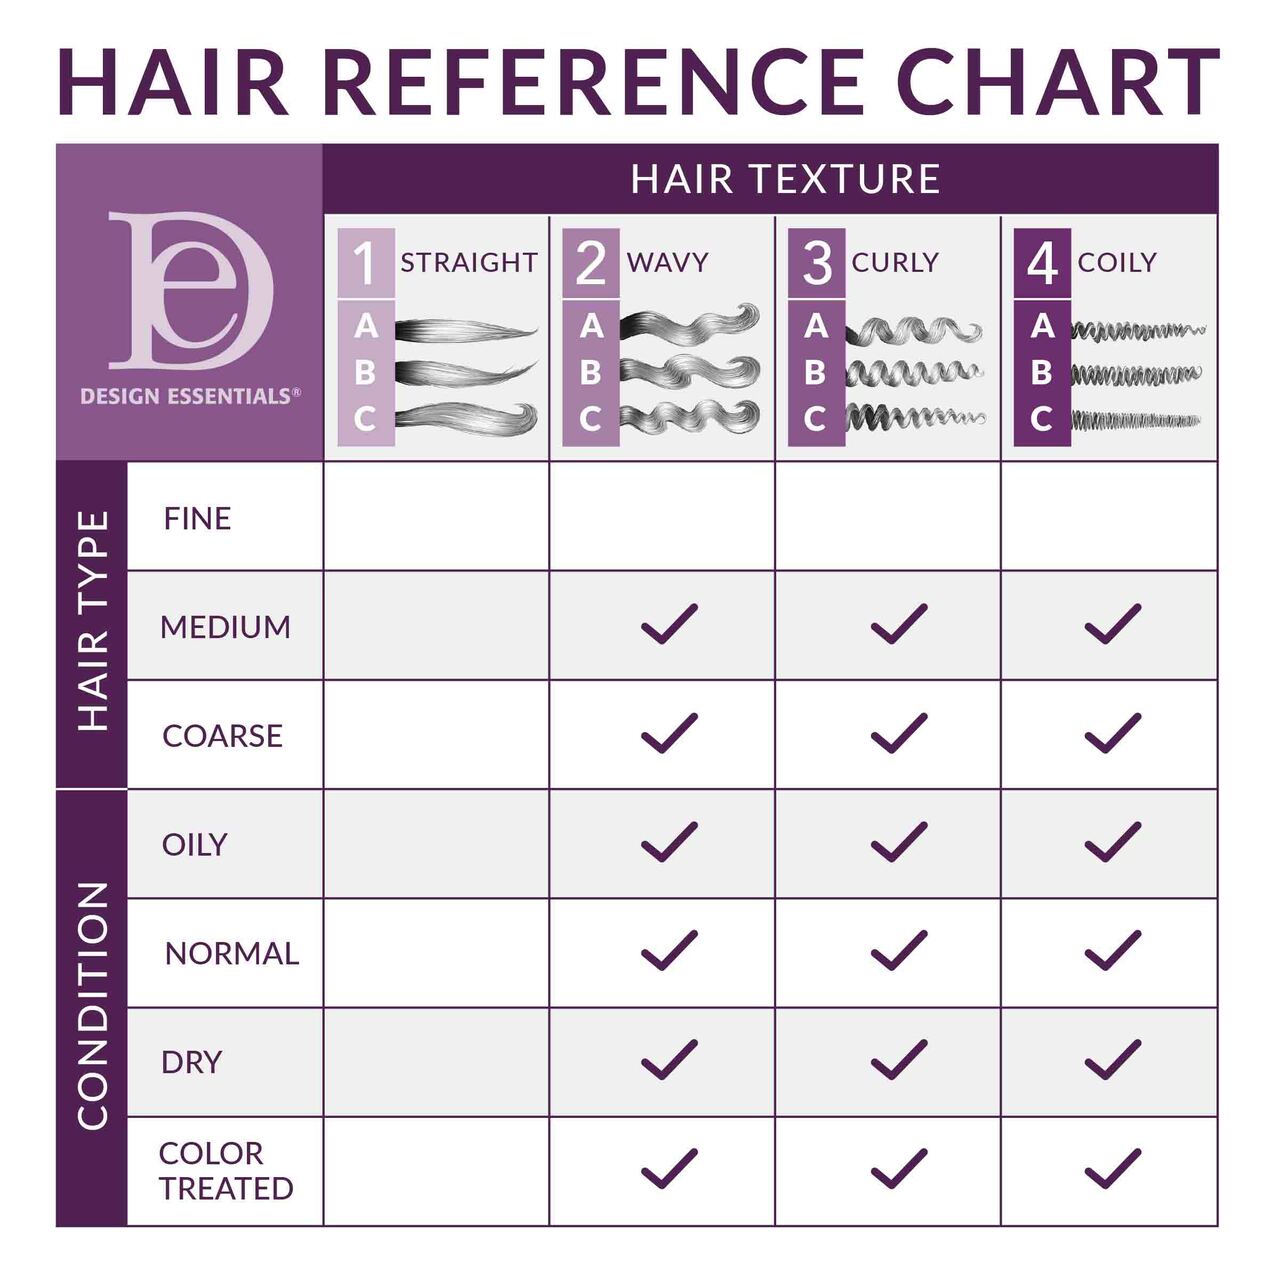 AA_Daily_Moisturizing_Lotion_-_Hair_Reference_Chart__01253.1581976698